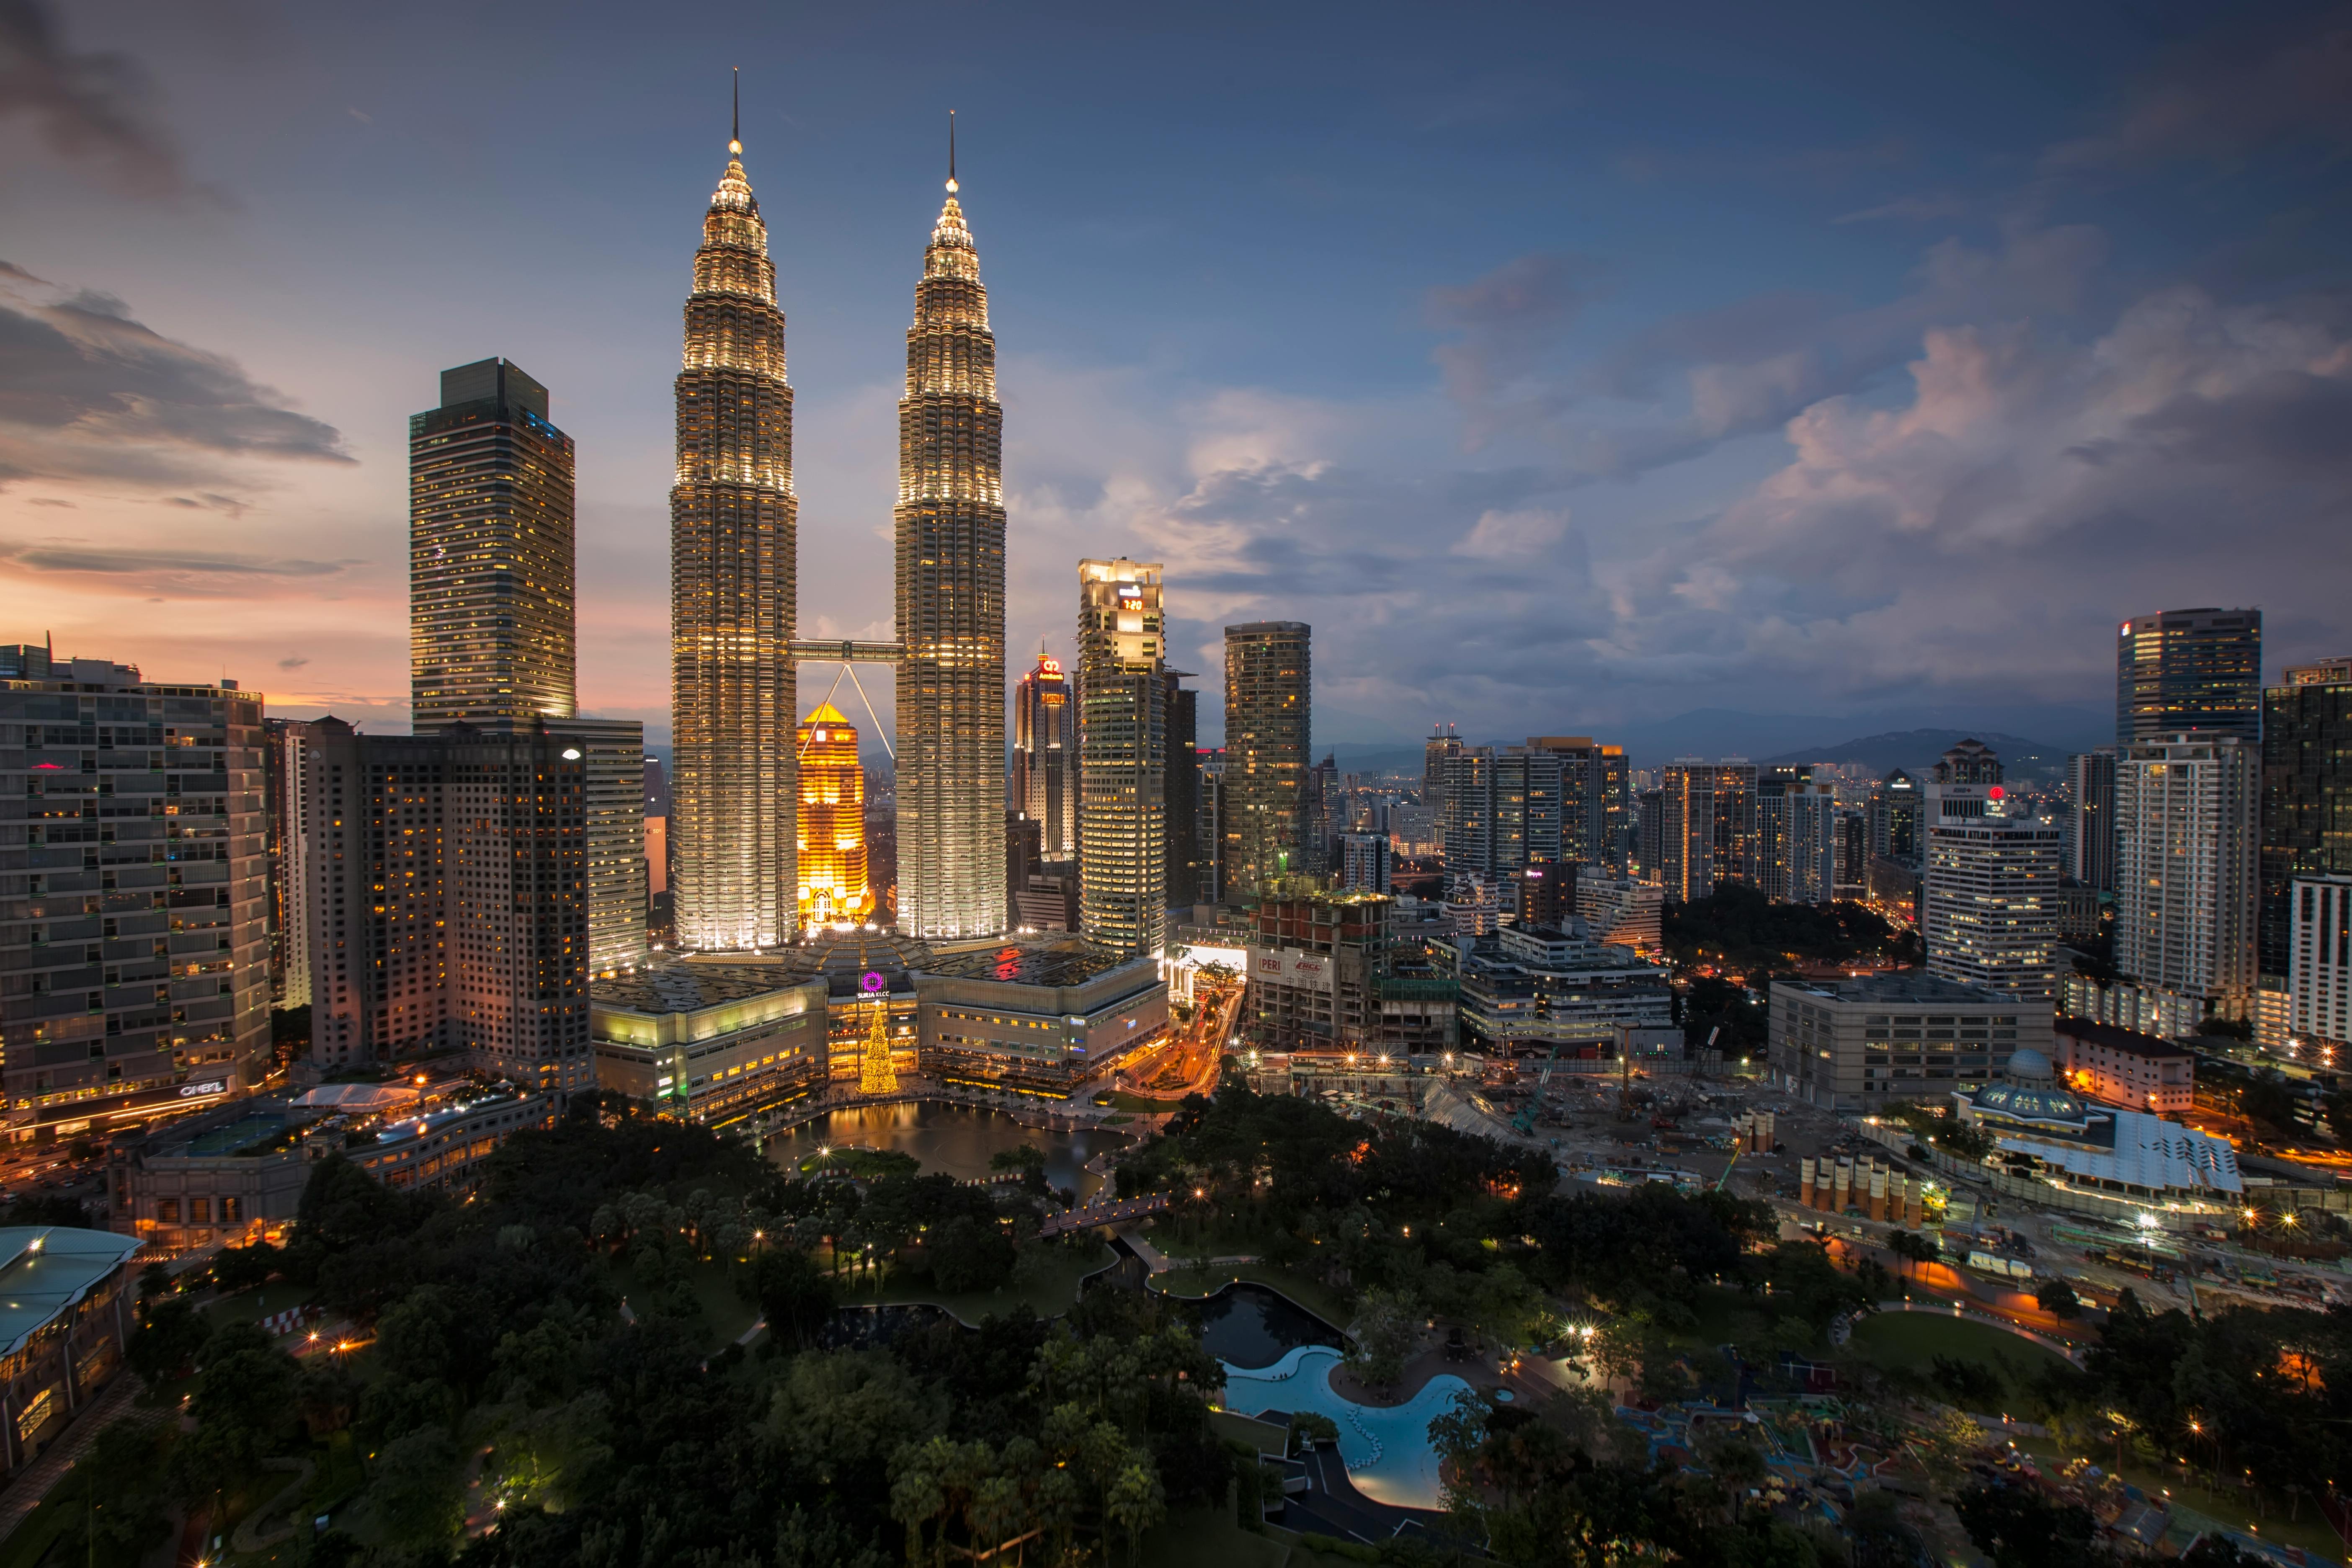 Malaysia Photos, Download The BEST Free Malaysia Stock Photos & HD Images